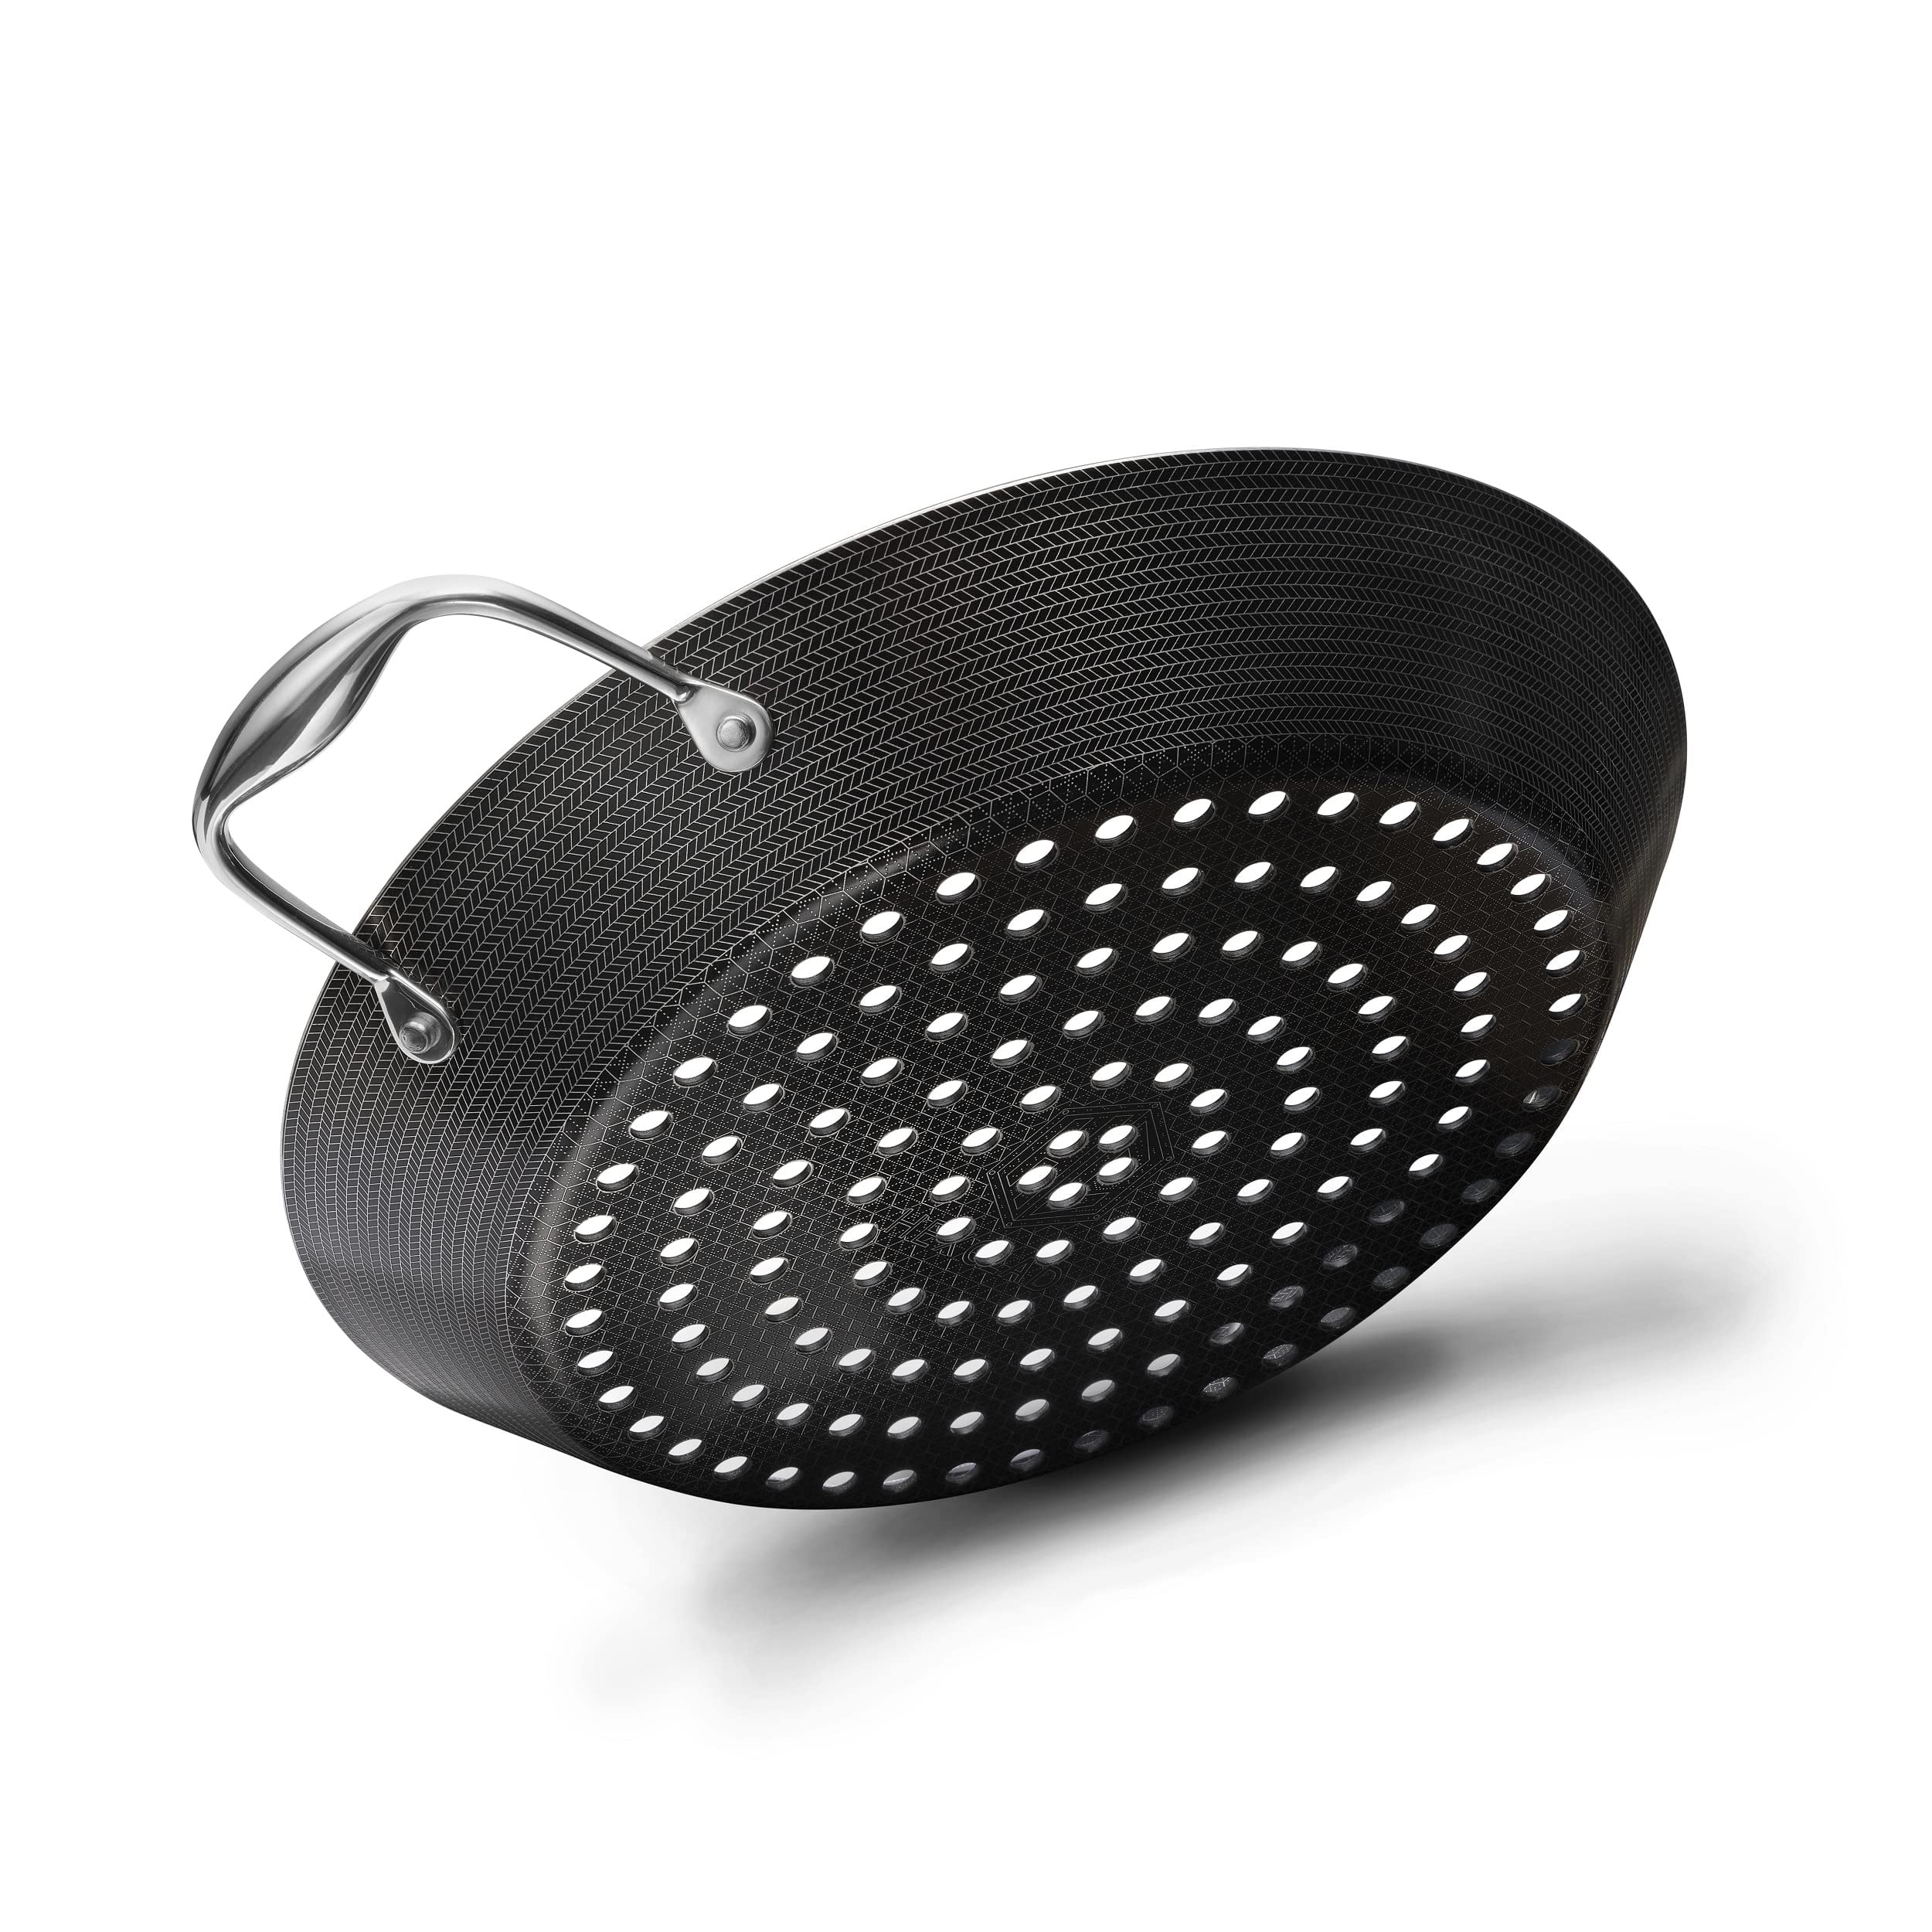 HexClad Barbeque Grill Pan, Hybrid Nonstick Surface, Perforations